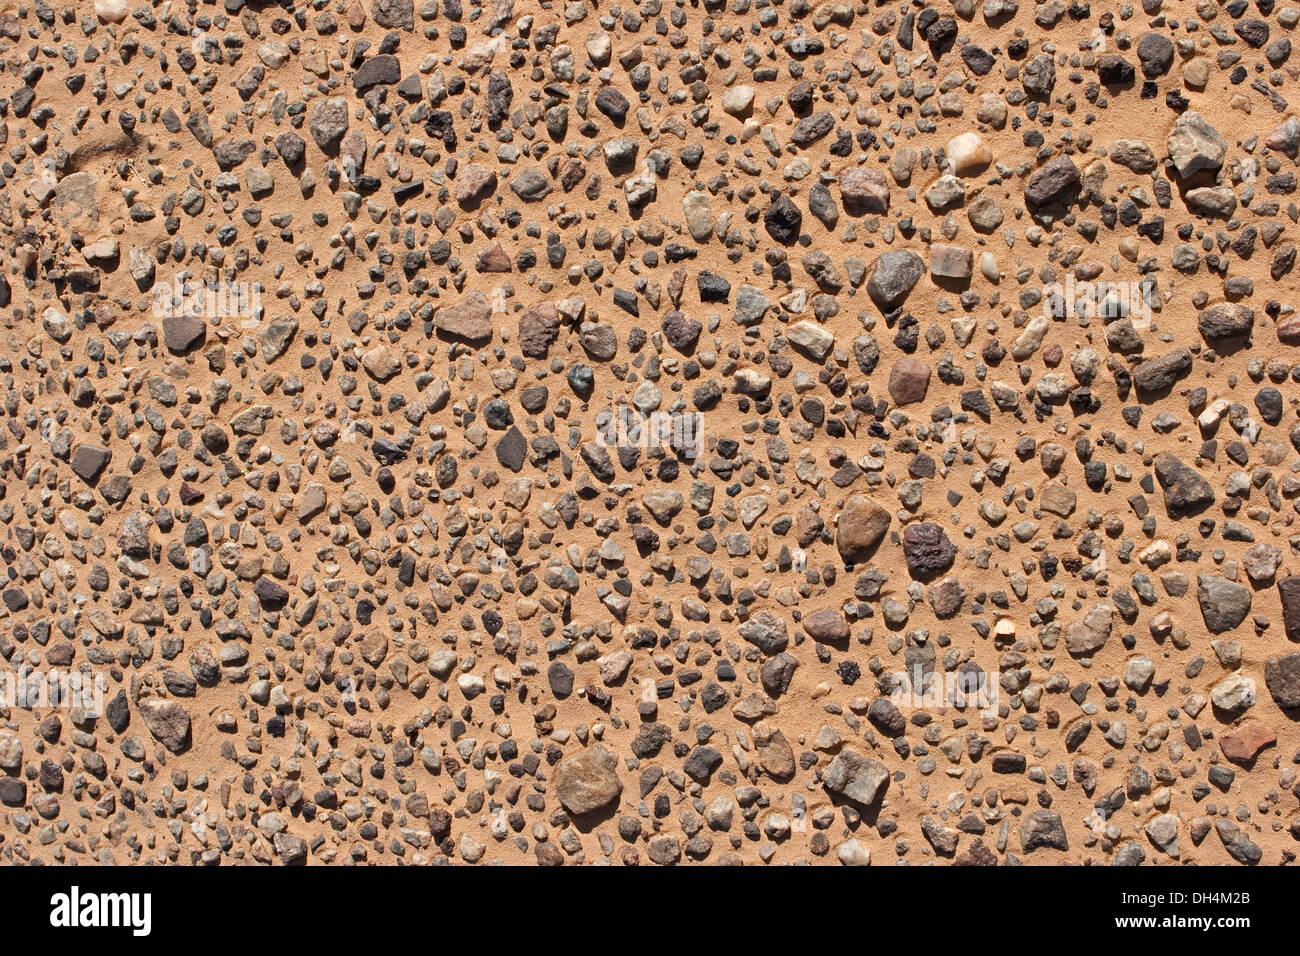 View down onto rock pebbles in desert sand Stock Photo